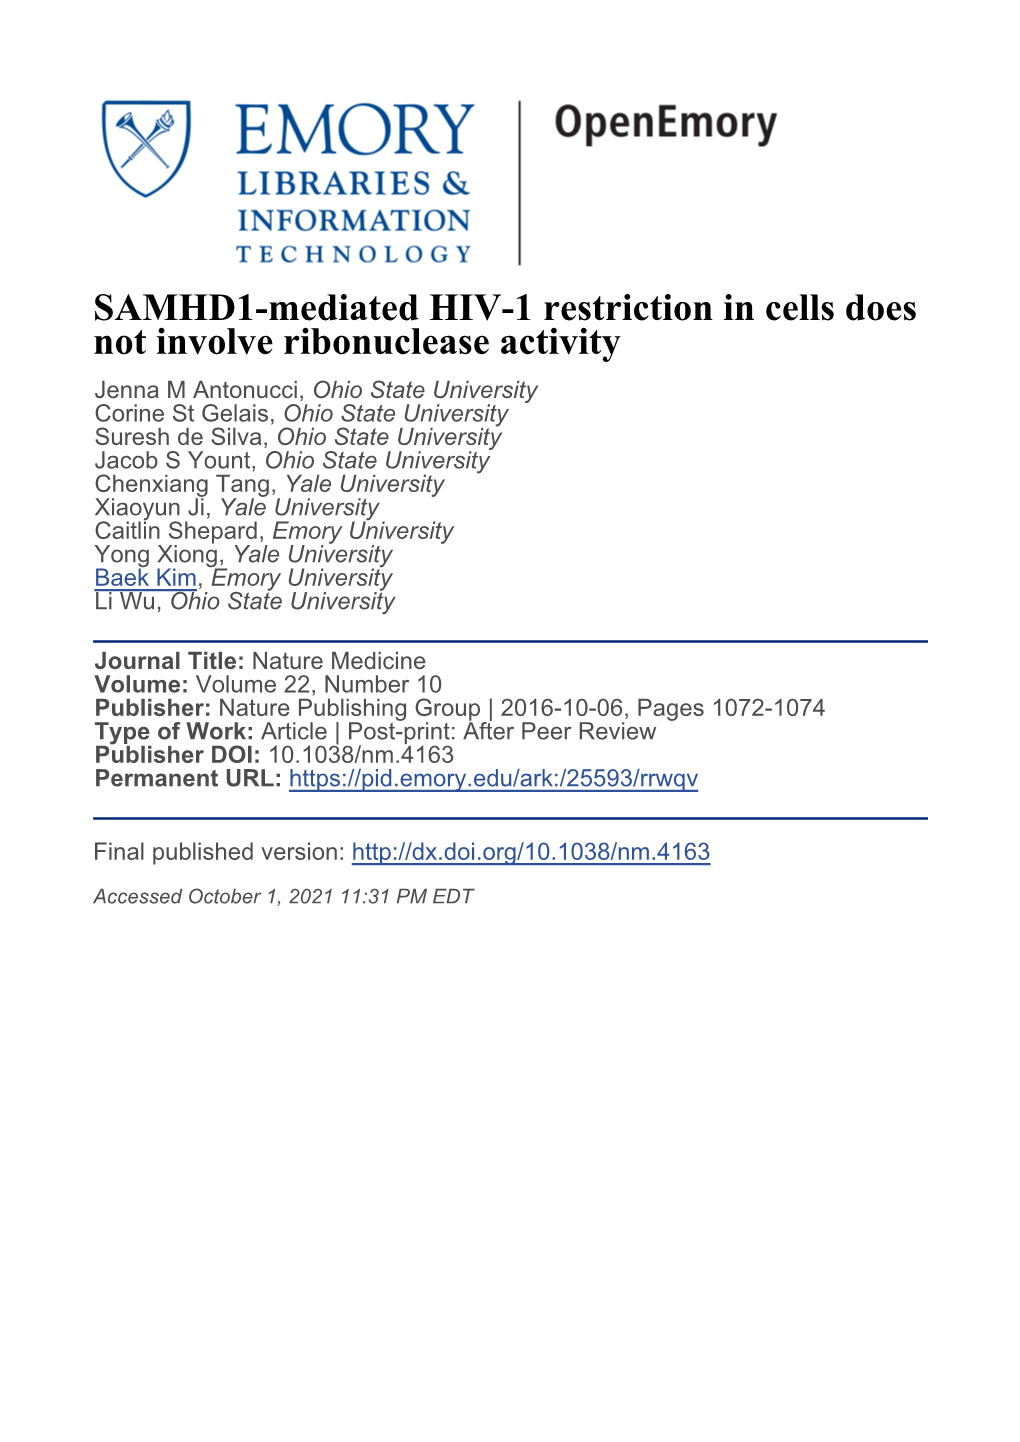 SAMHD1-Mediated HIV-1 Restriction in Cells Does Not